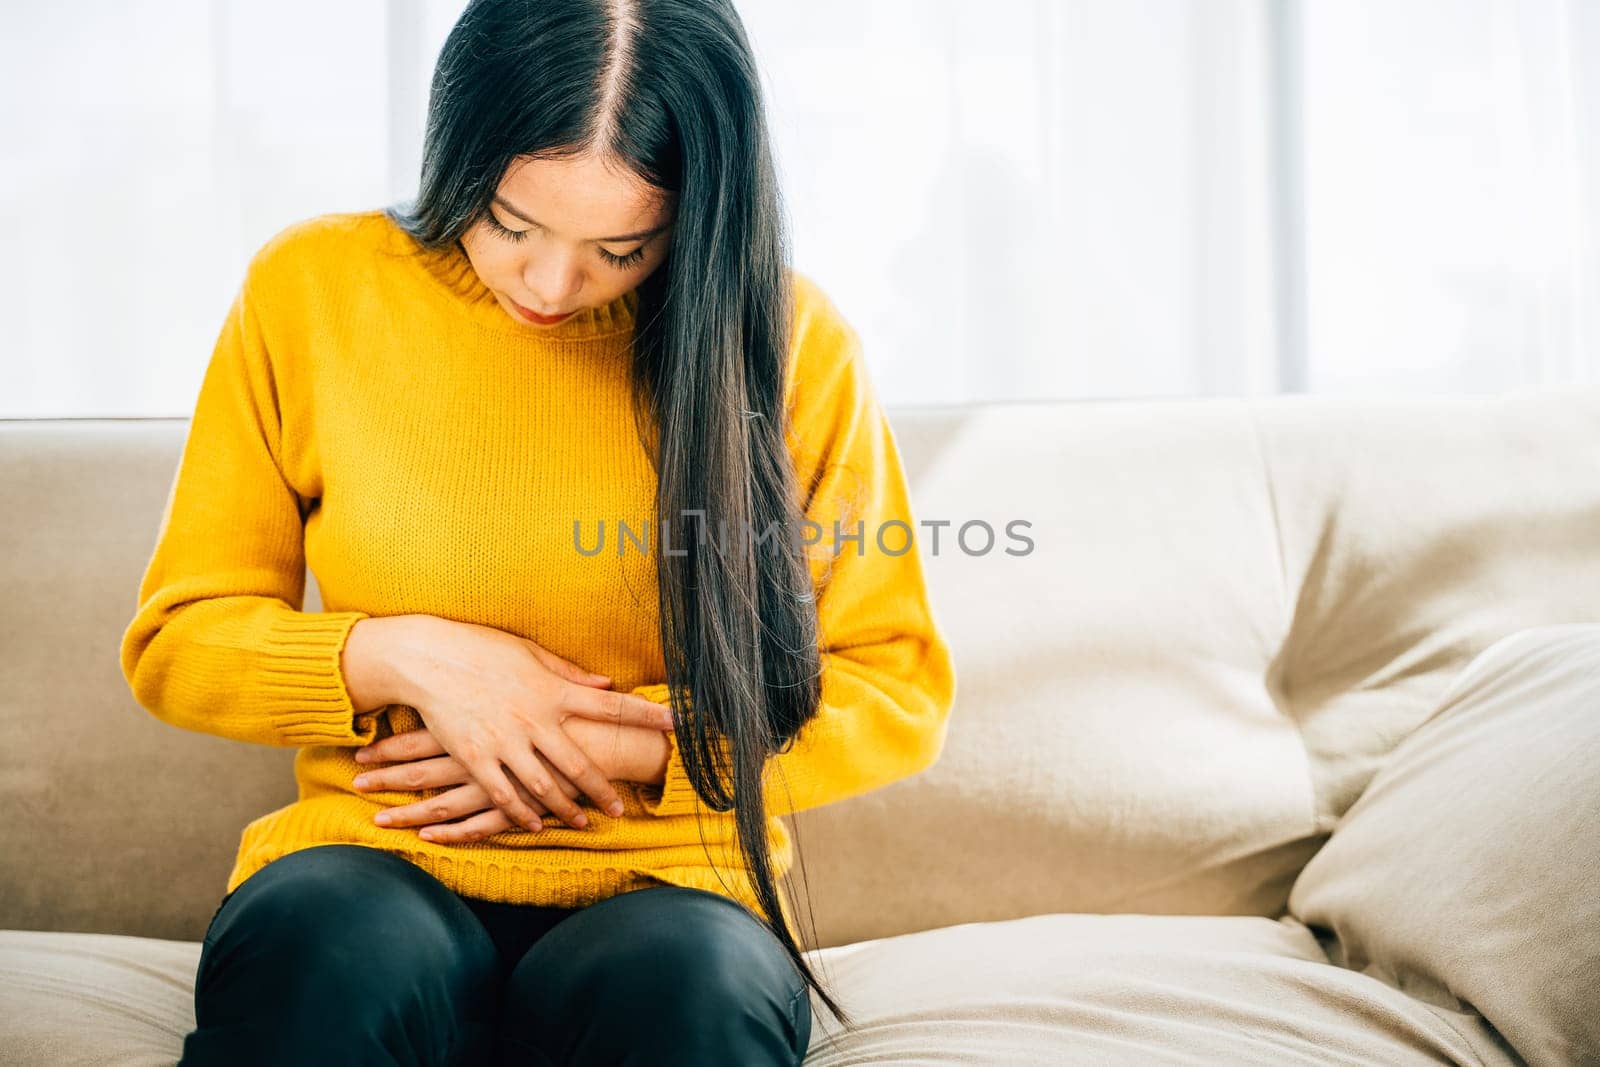 Asian woman seated on a home couch experiences abdominal pain by Sorapop